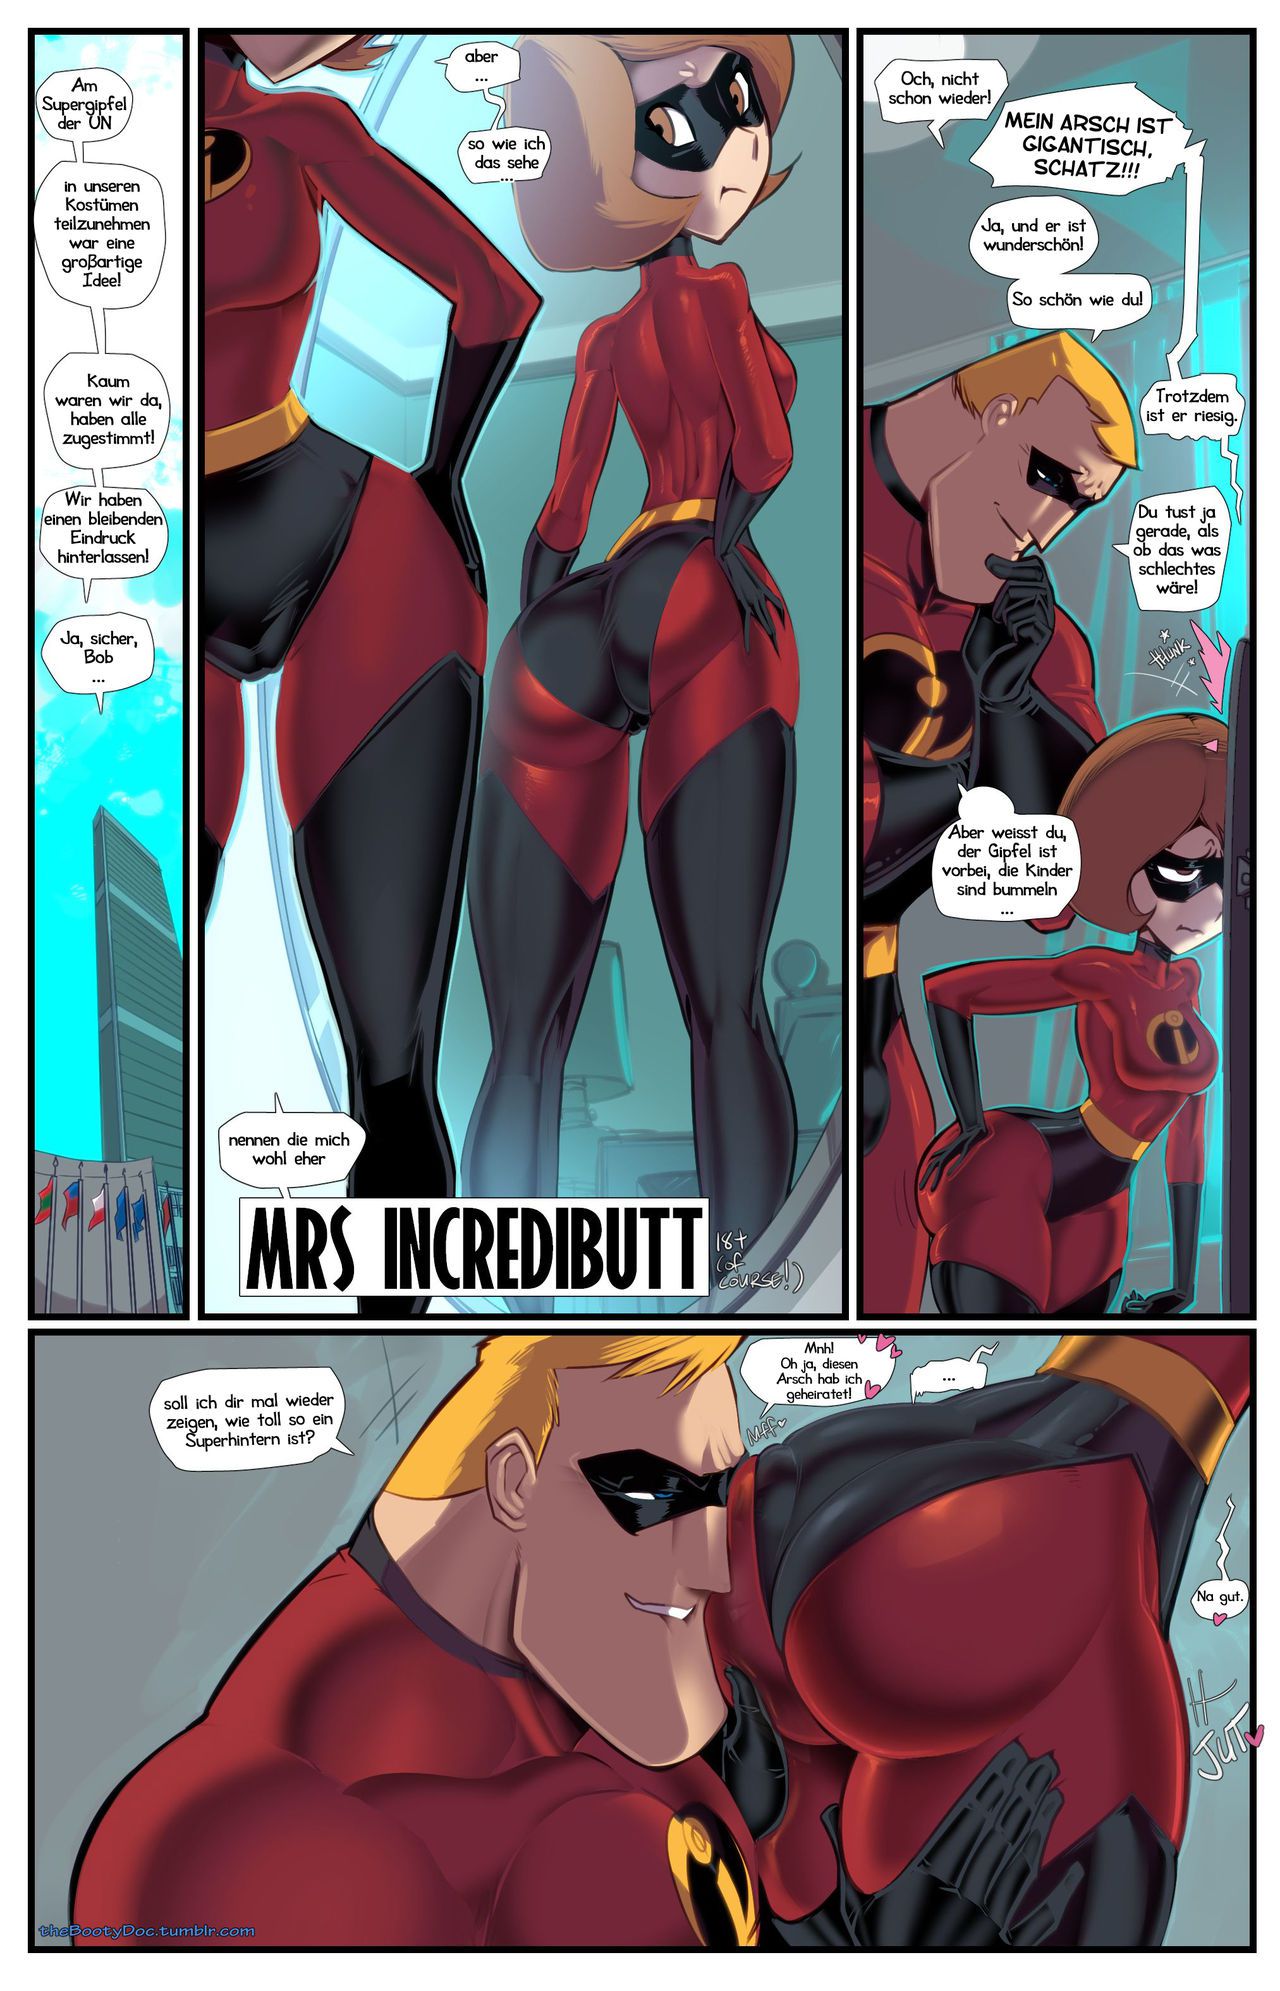 [Fred Perry] Mrs Incredibutt (The Incredibles) [German] [Haigen] 1